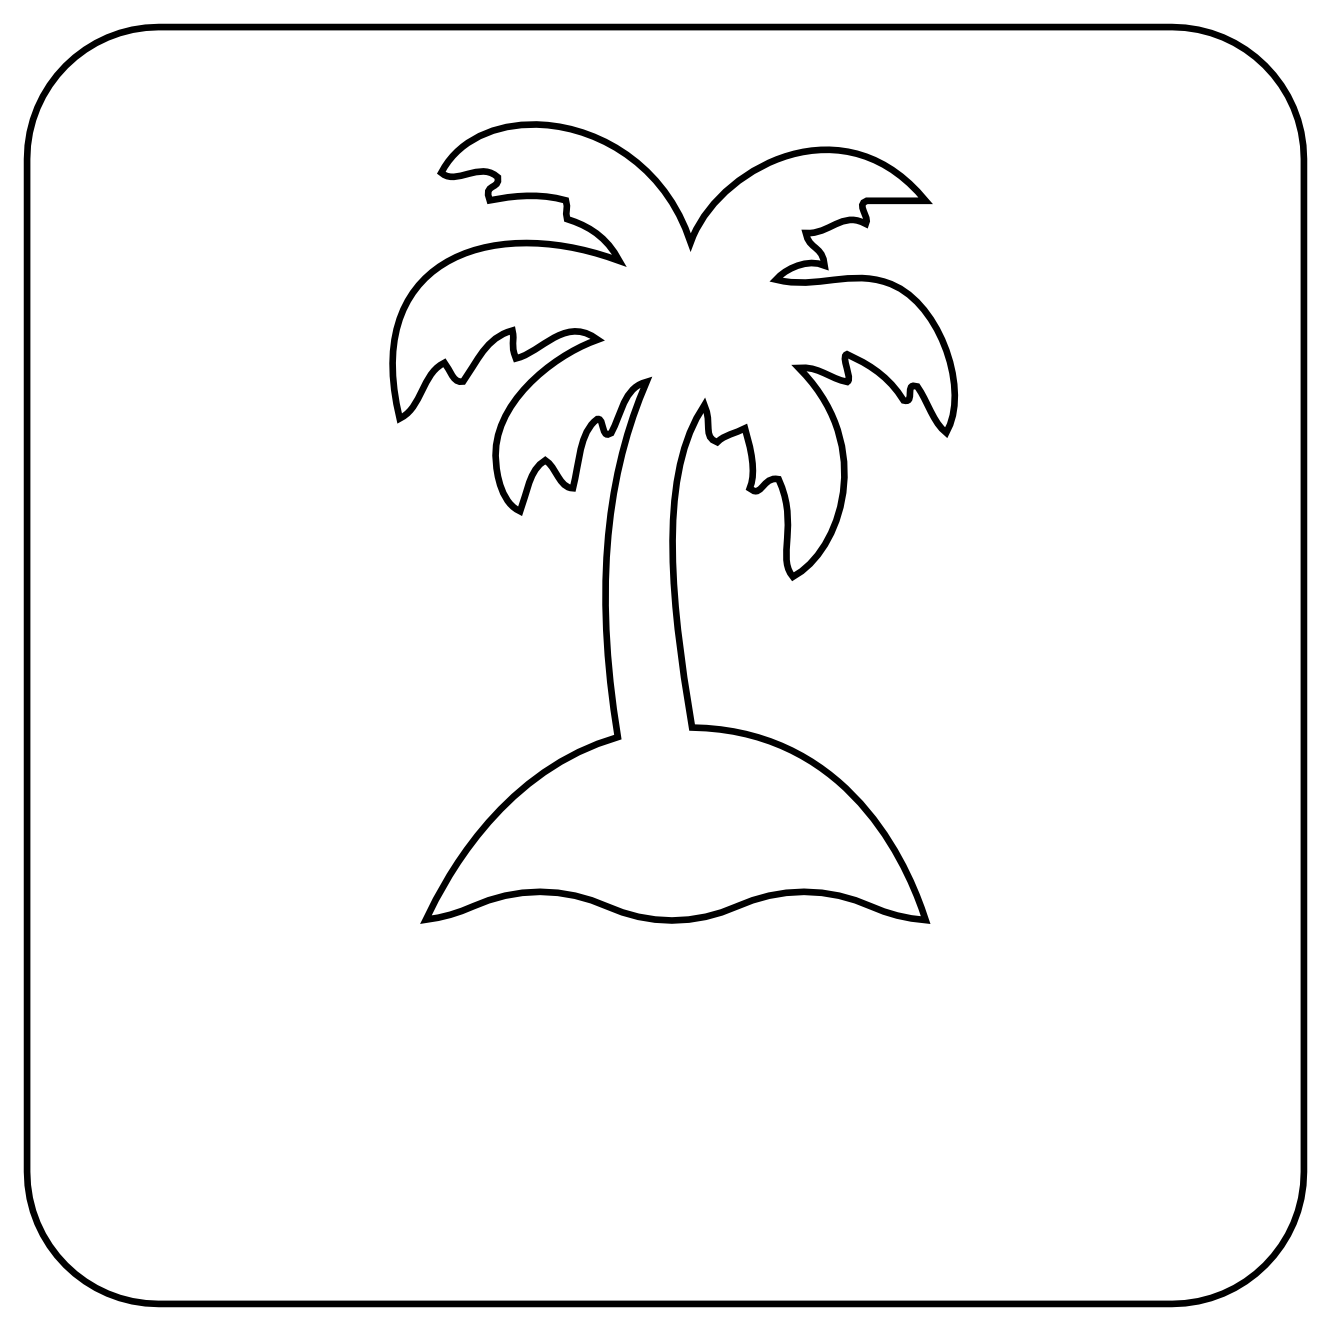 Tree Line Drawings - ClipArt Best